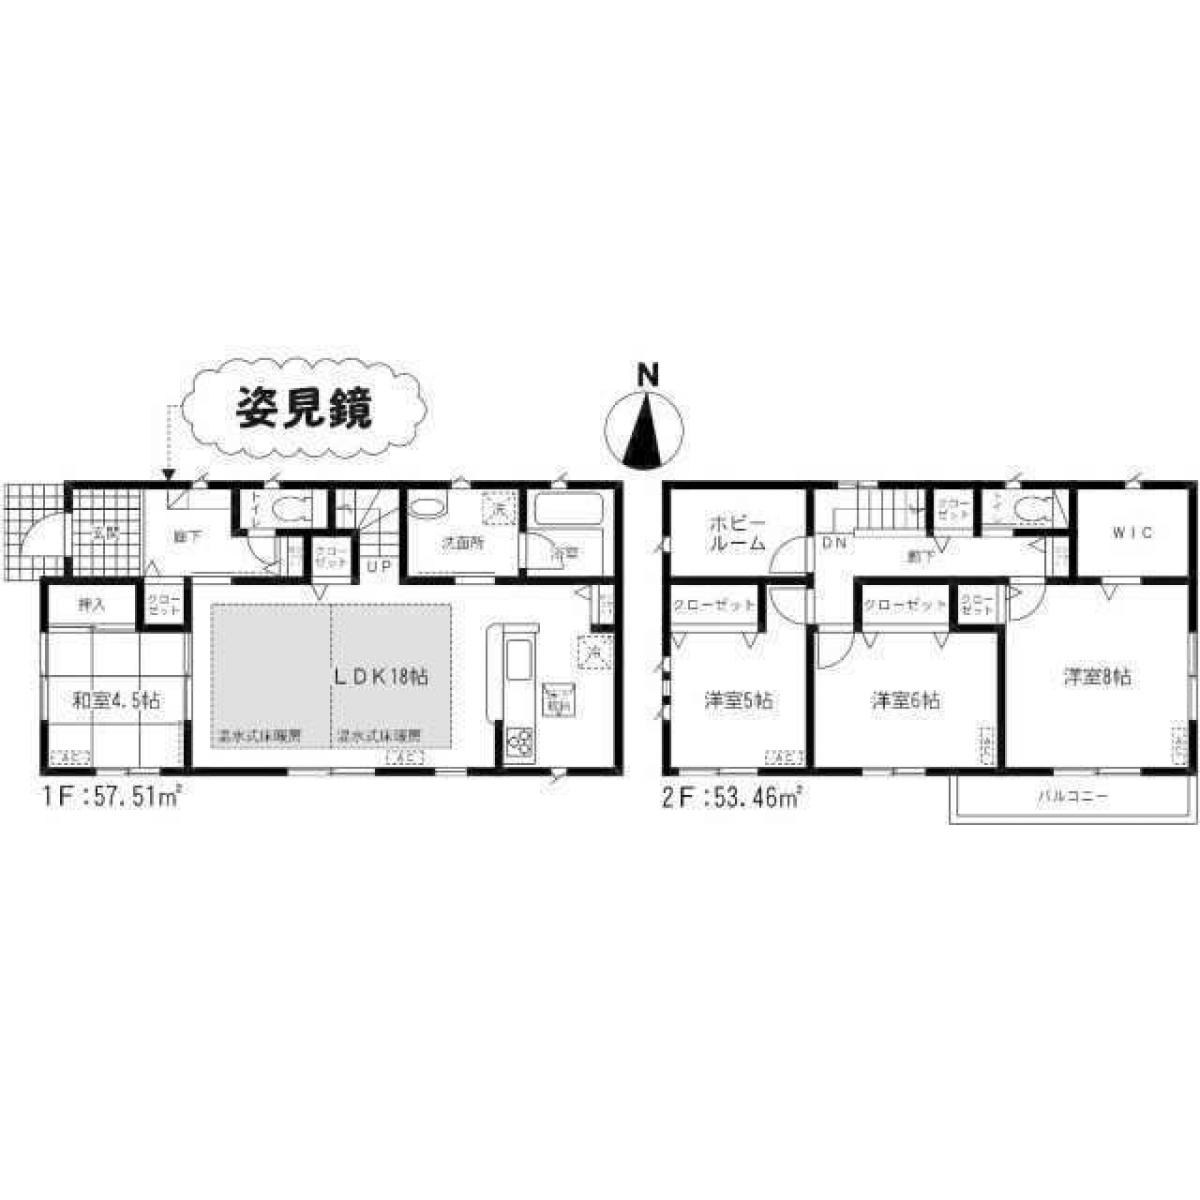 Picture of Home For Sale in Sodegaura Shi, Chiba, Japan